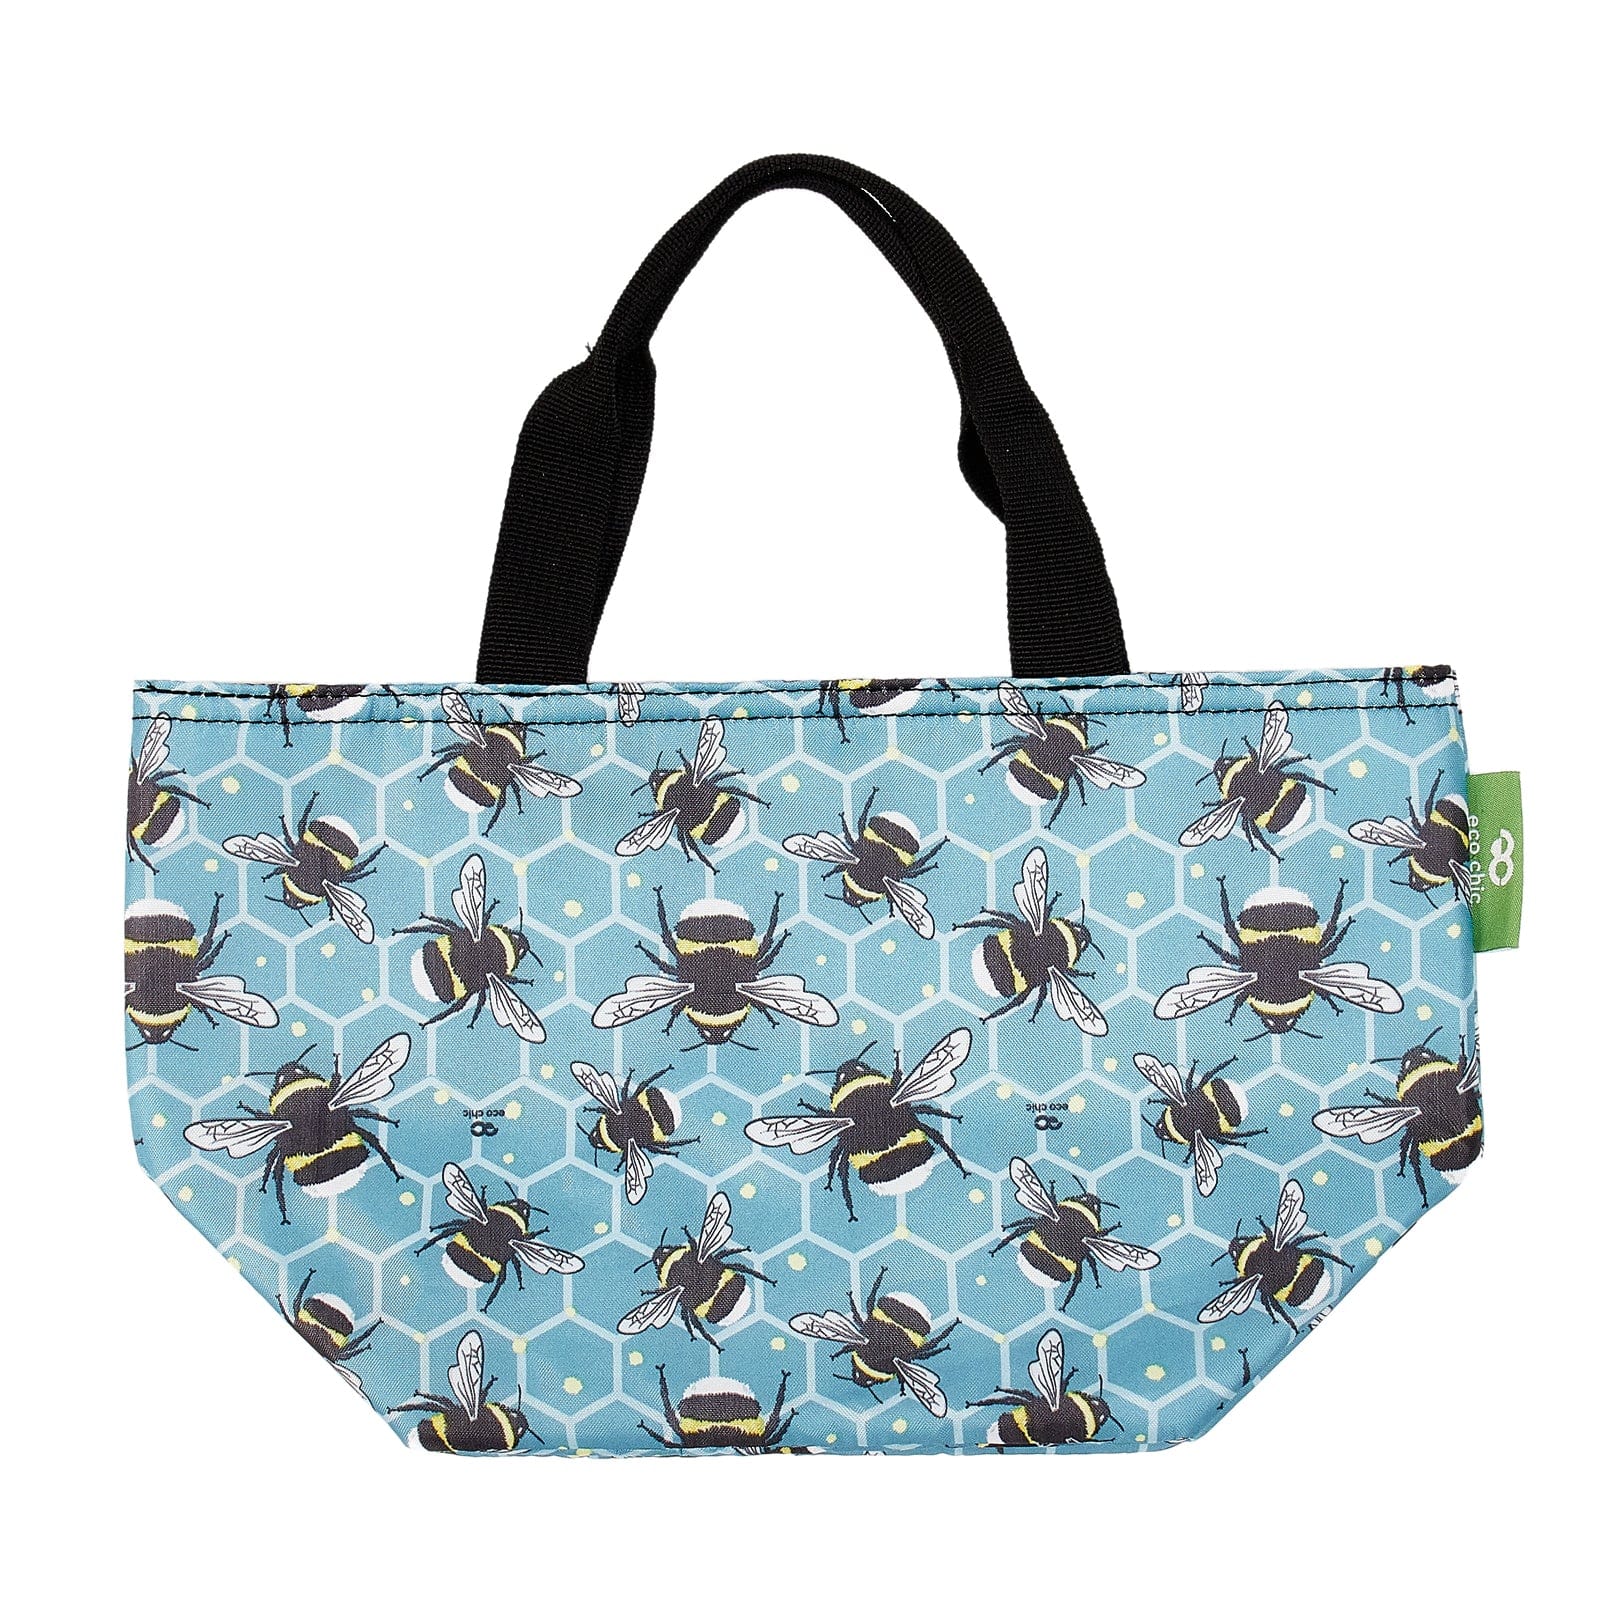 Eco Chic Eco Chic Lightweight Foldable Lunch Bag Bumble Bees